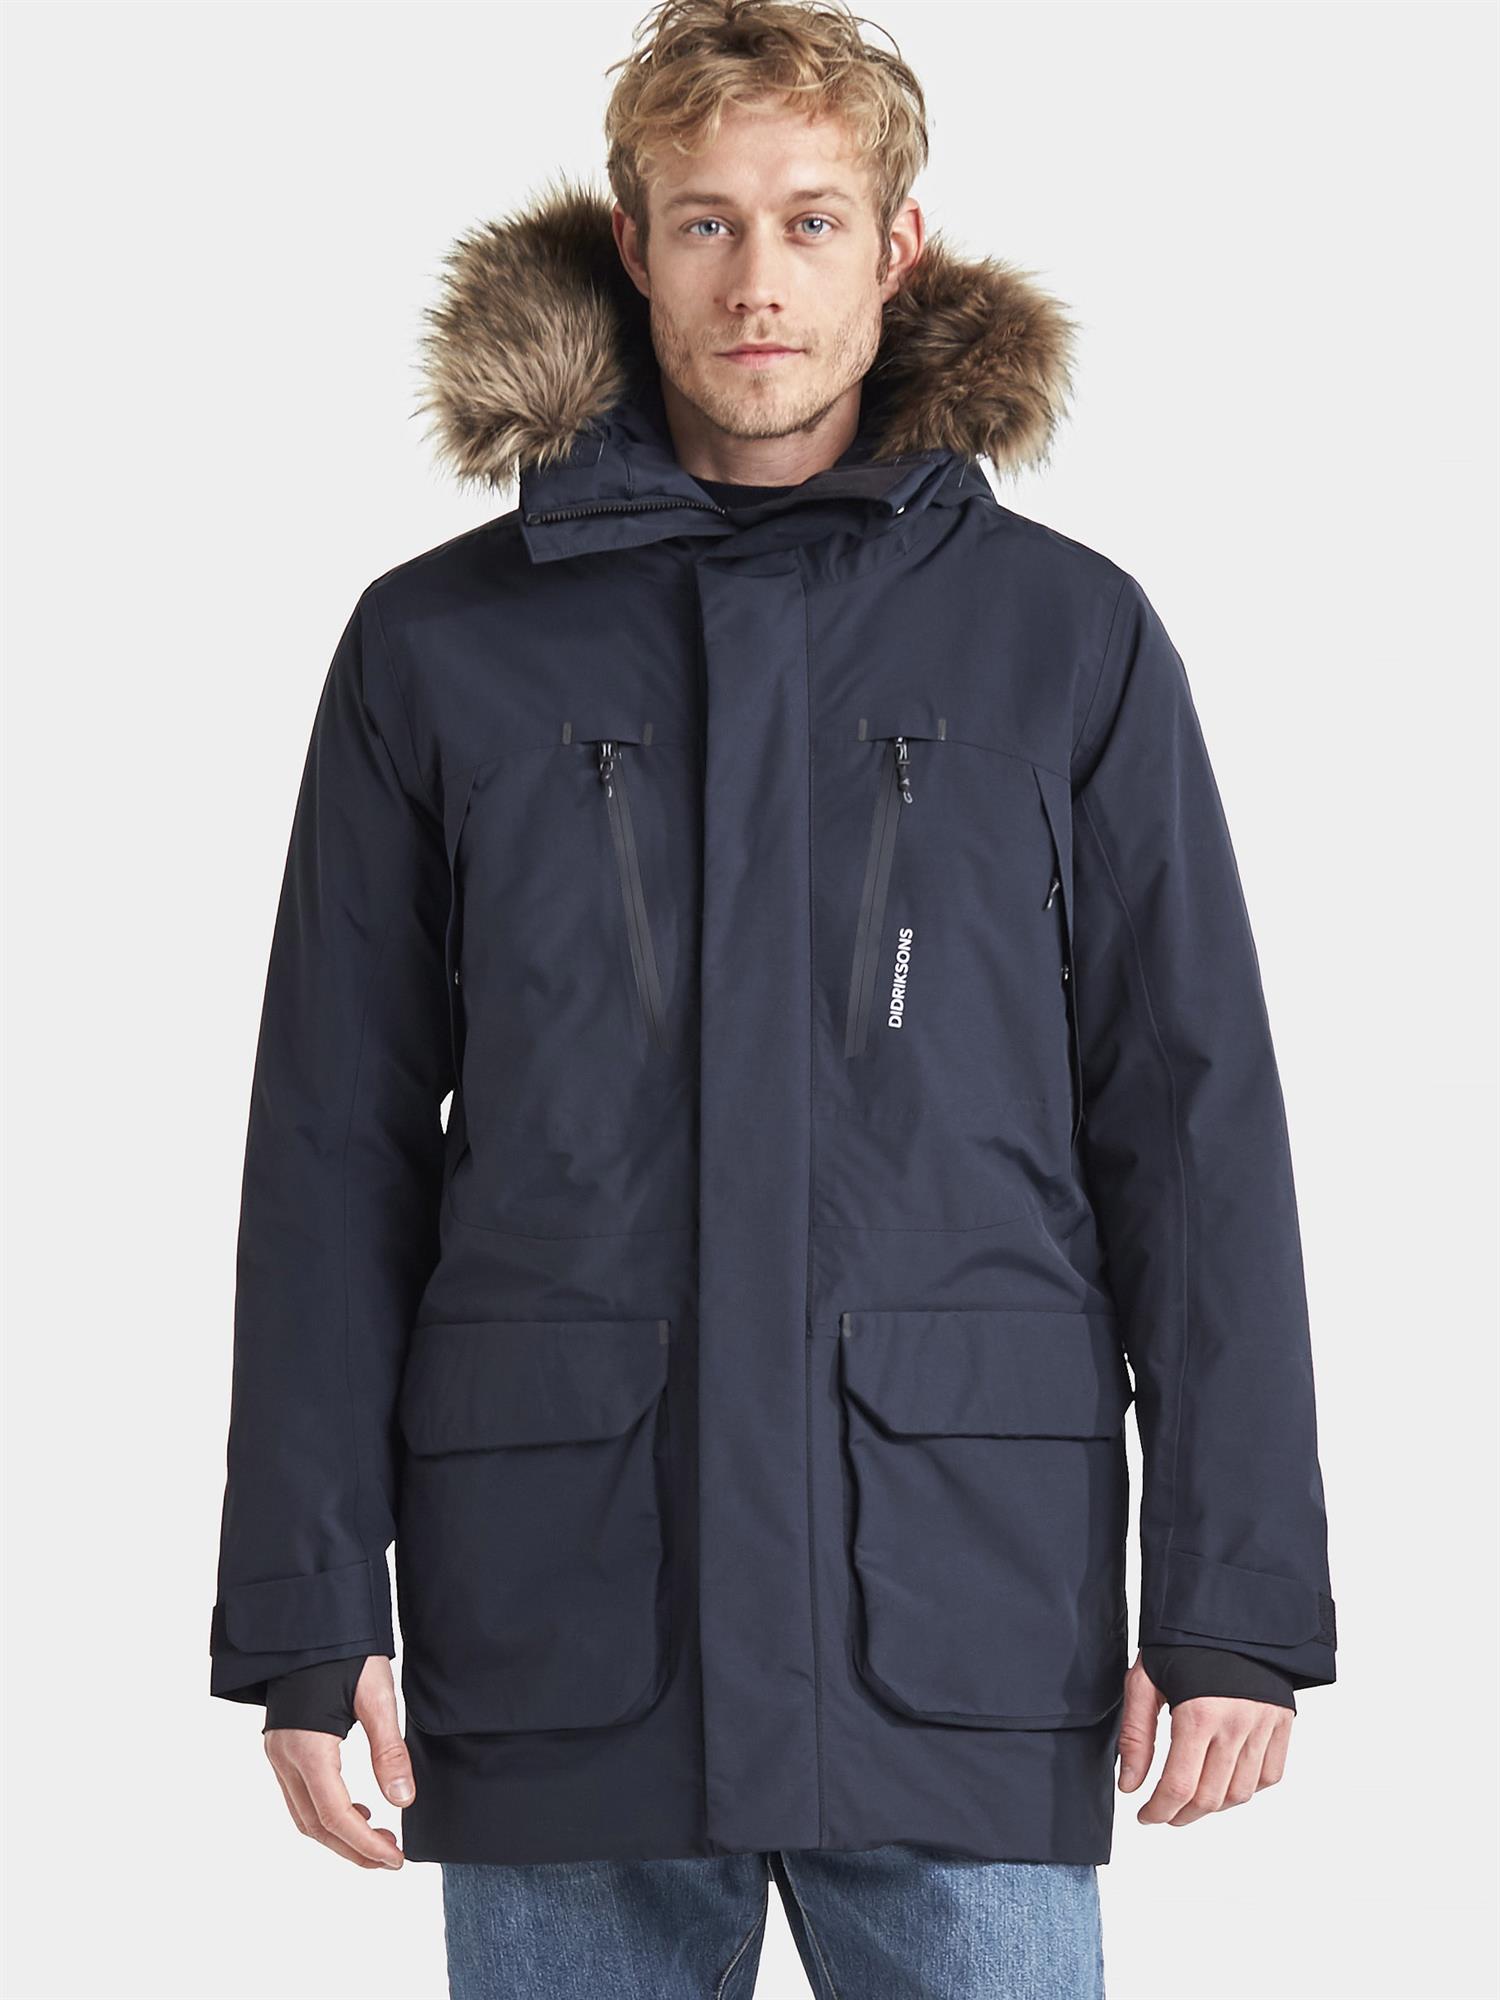 Didriksons Marco Mens Insulated Waterproof Parka | eBay